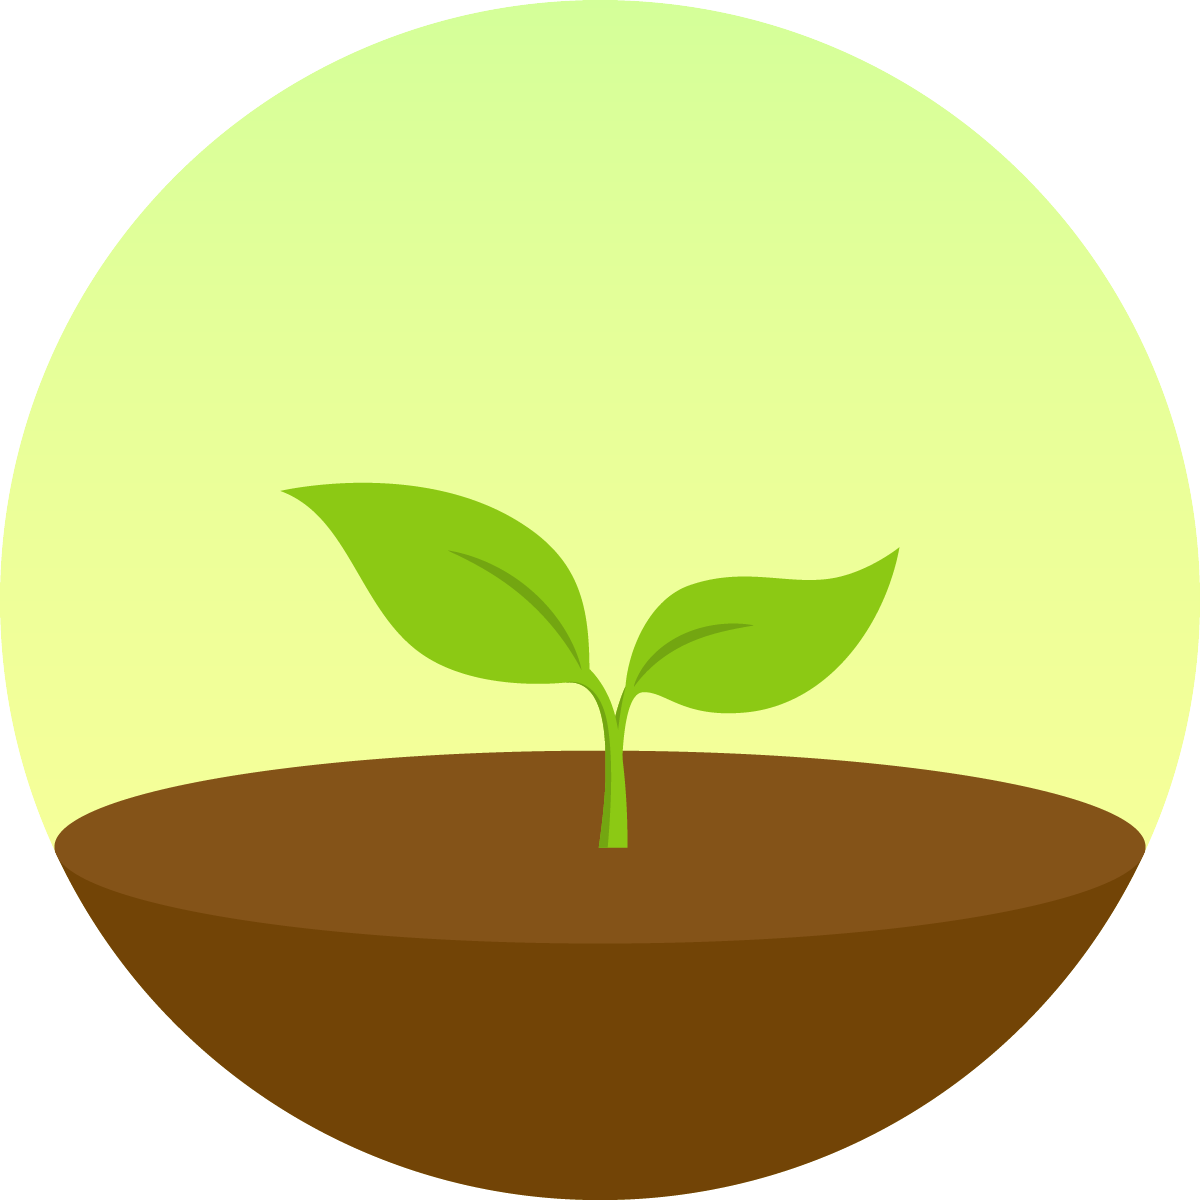 Forest app icon. A tree is germinating out of soil